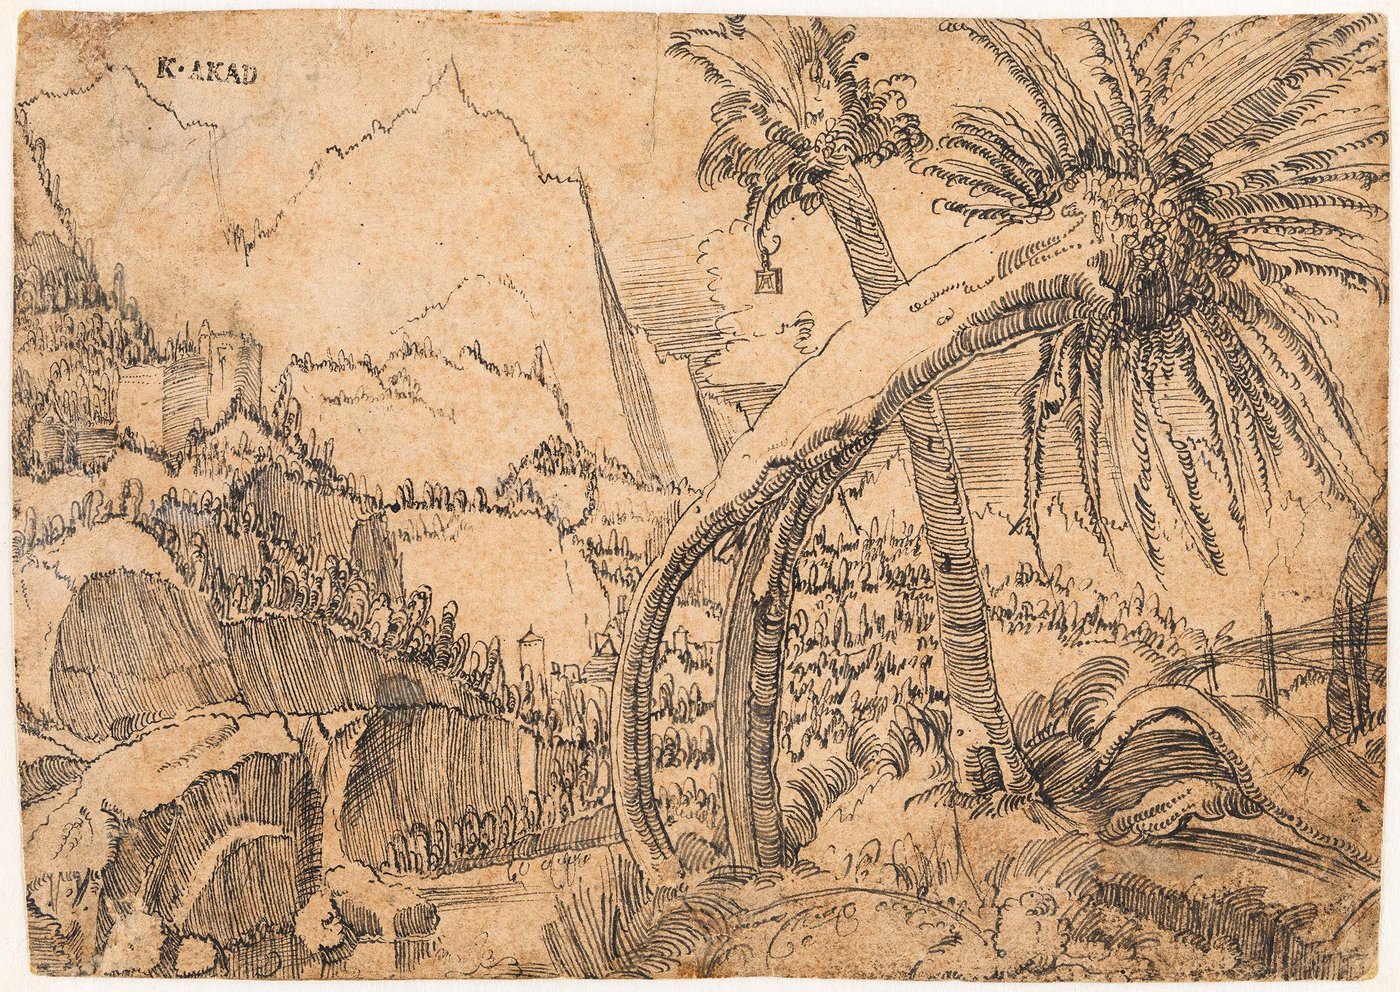 A landscape drawing on brownish paper showing two crooked, weathered willows very dominantly on the right side of the picture. On the left side of the drawing one sees a hilly landscape in the background, fields and isolated buildings depicted in a very fast and rough manner.